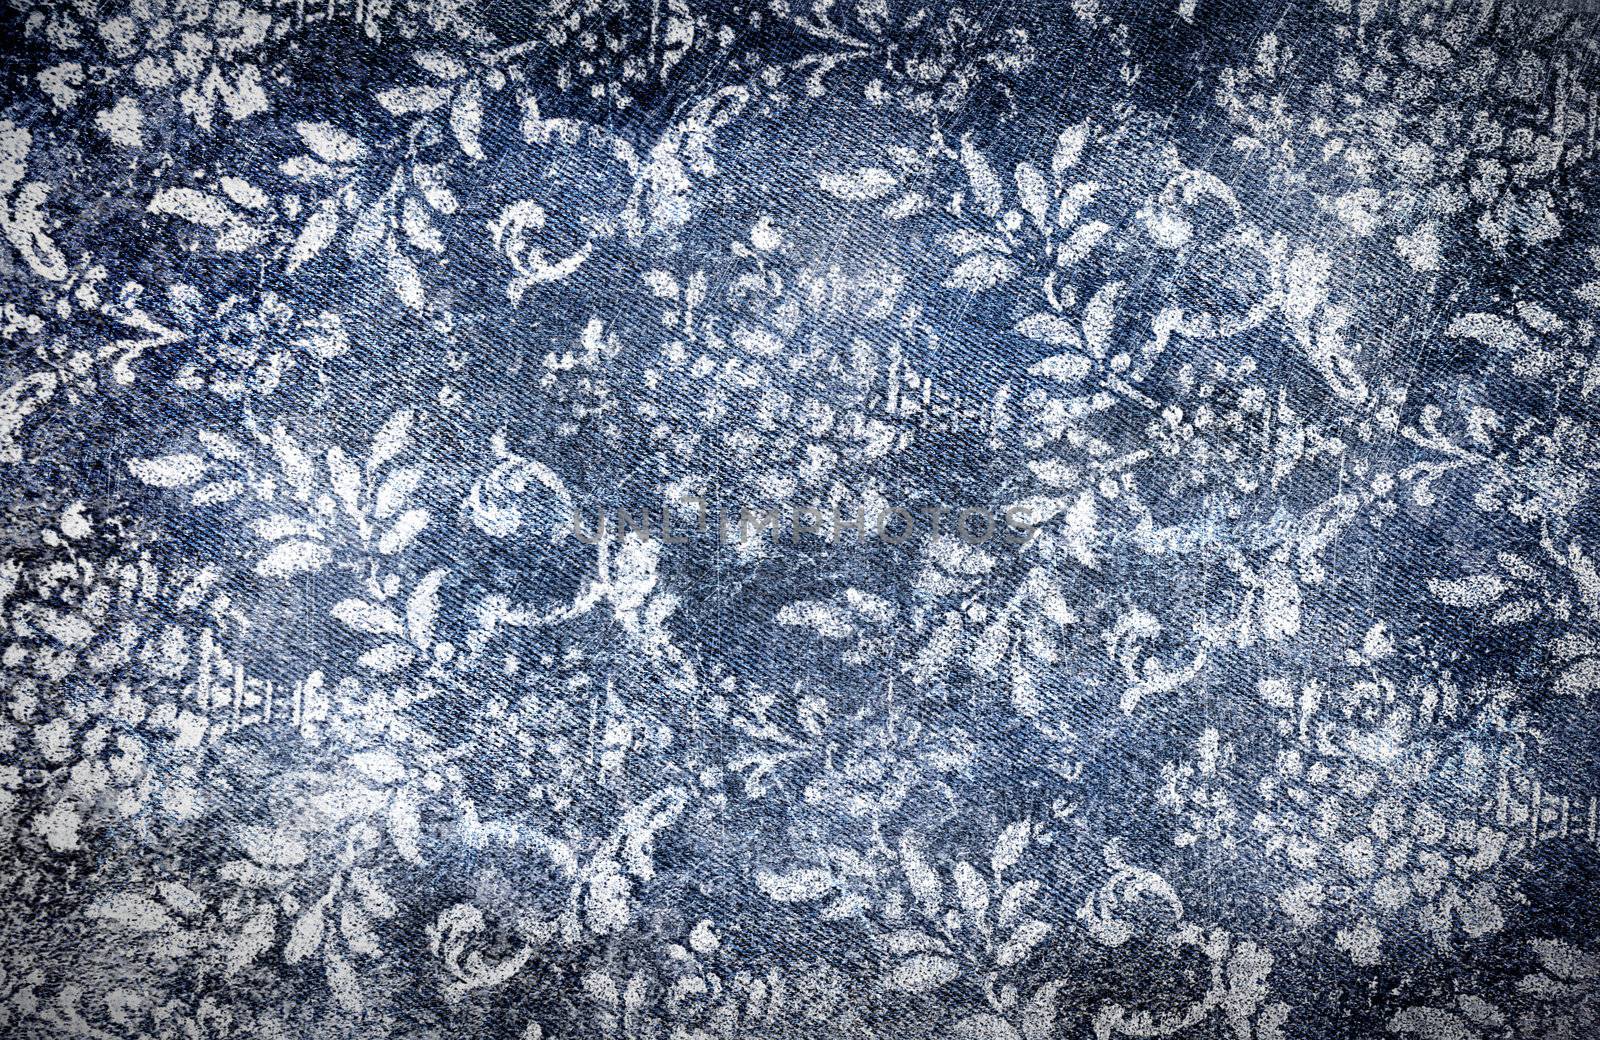 Grungy denim with faded floral effect by Sandralise